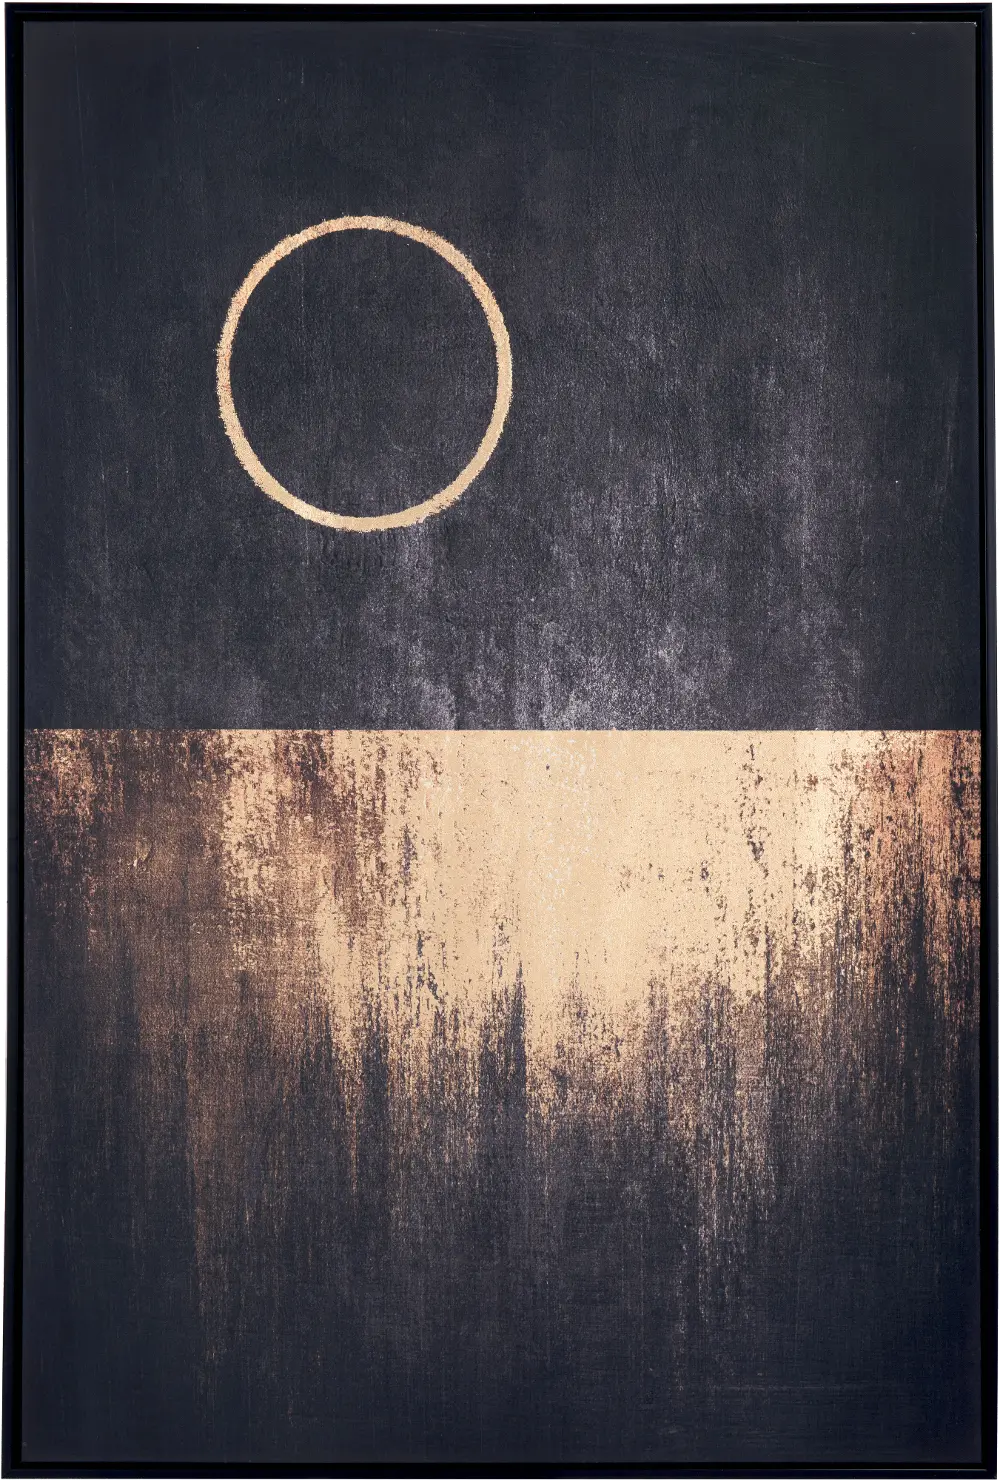 Black and Gold Full Moon Rises Canvas Wall Art-1